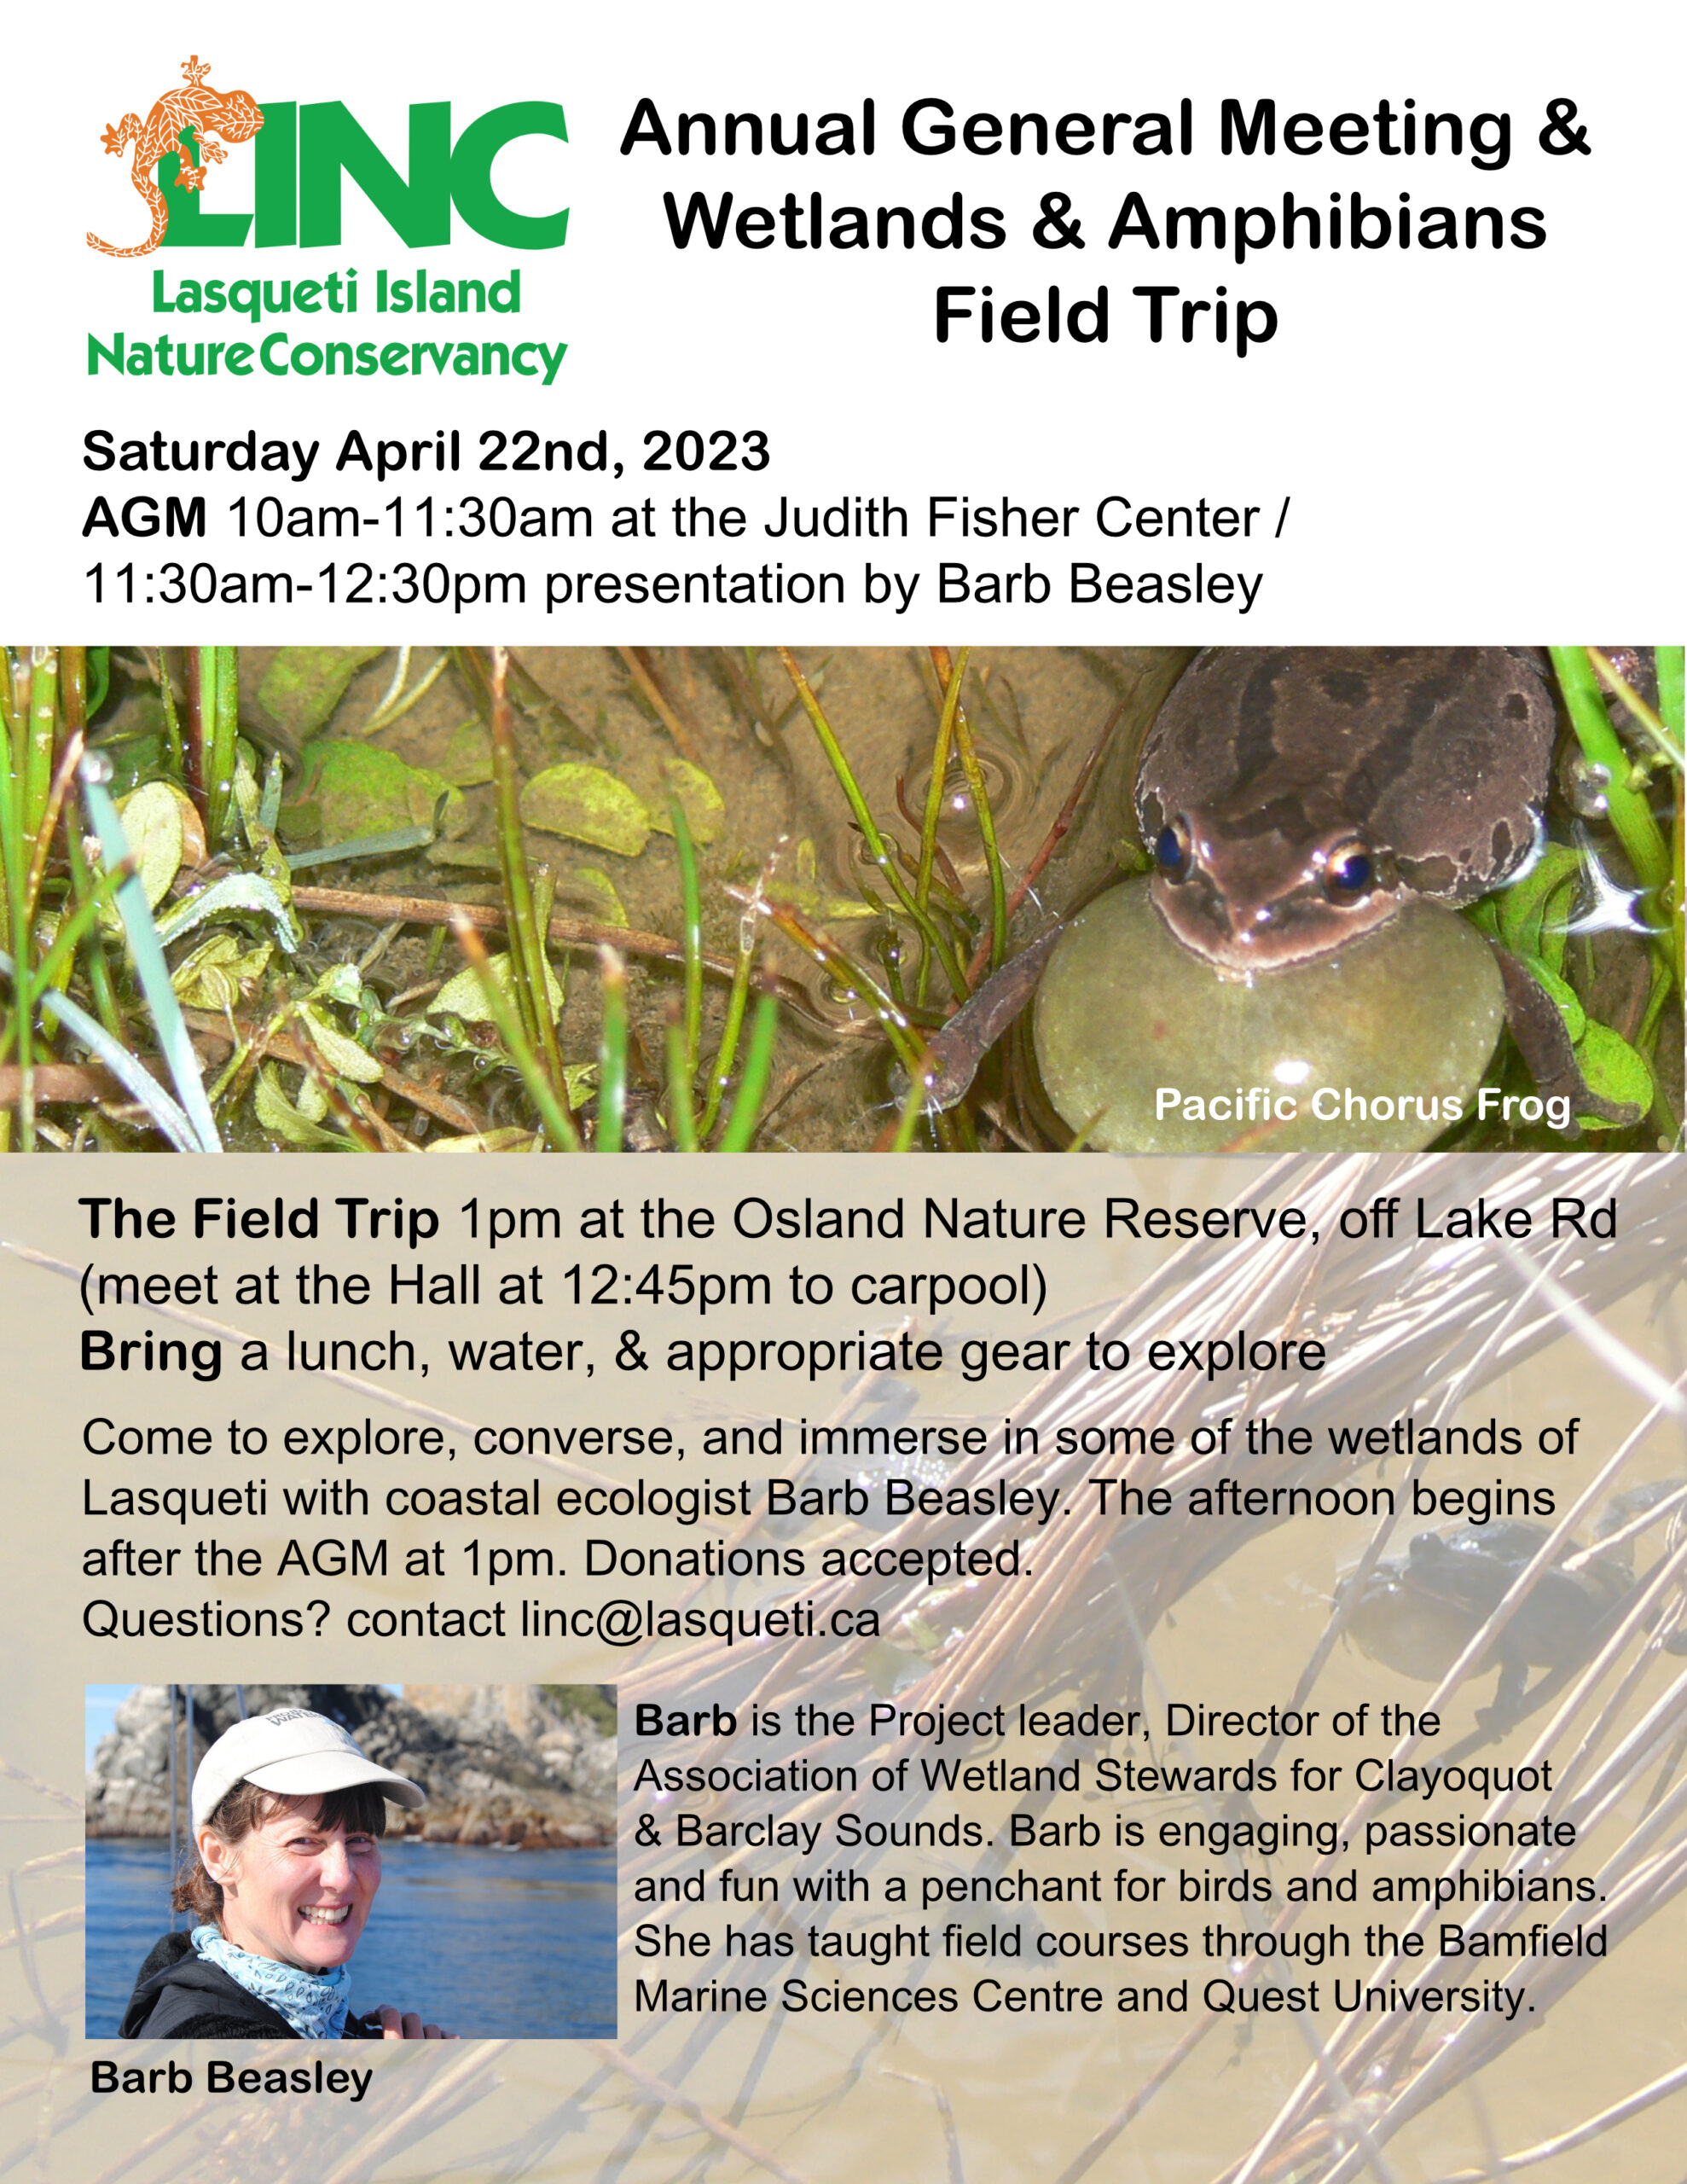 April 22nd – Annual General Meeting and Wetlands & Amphibians Field Trip